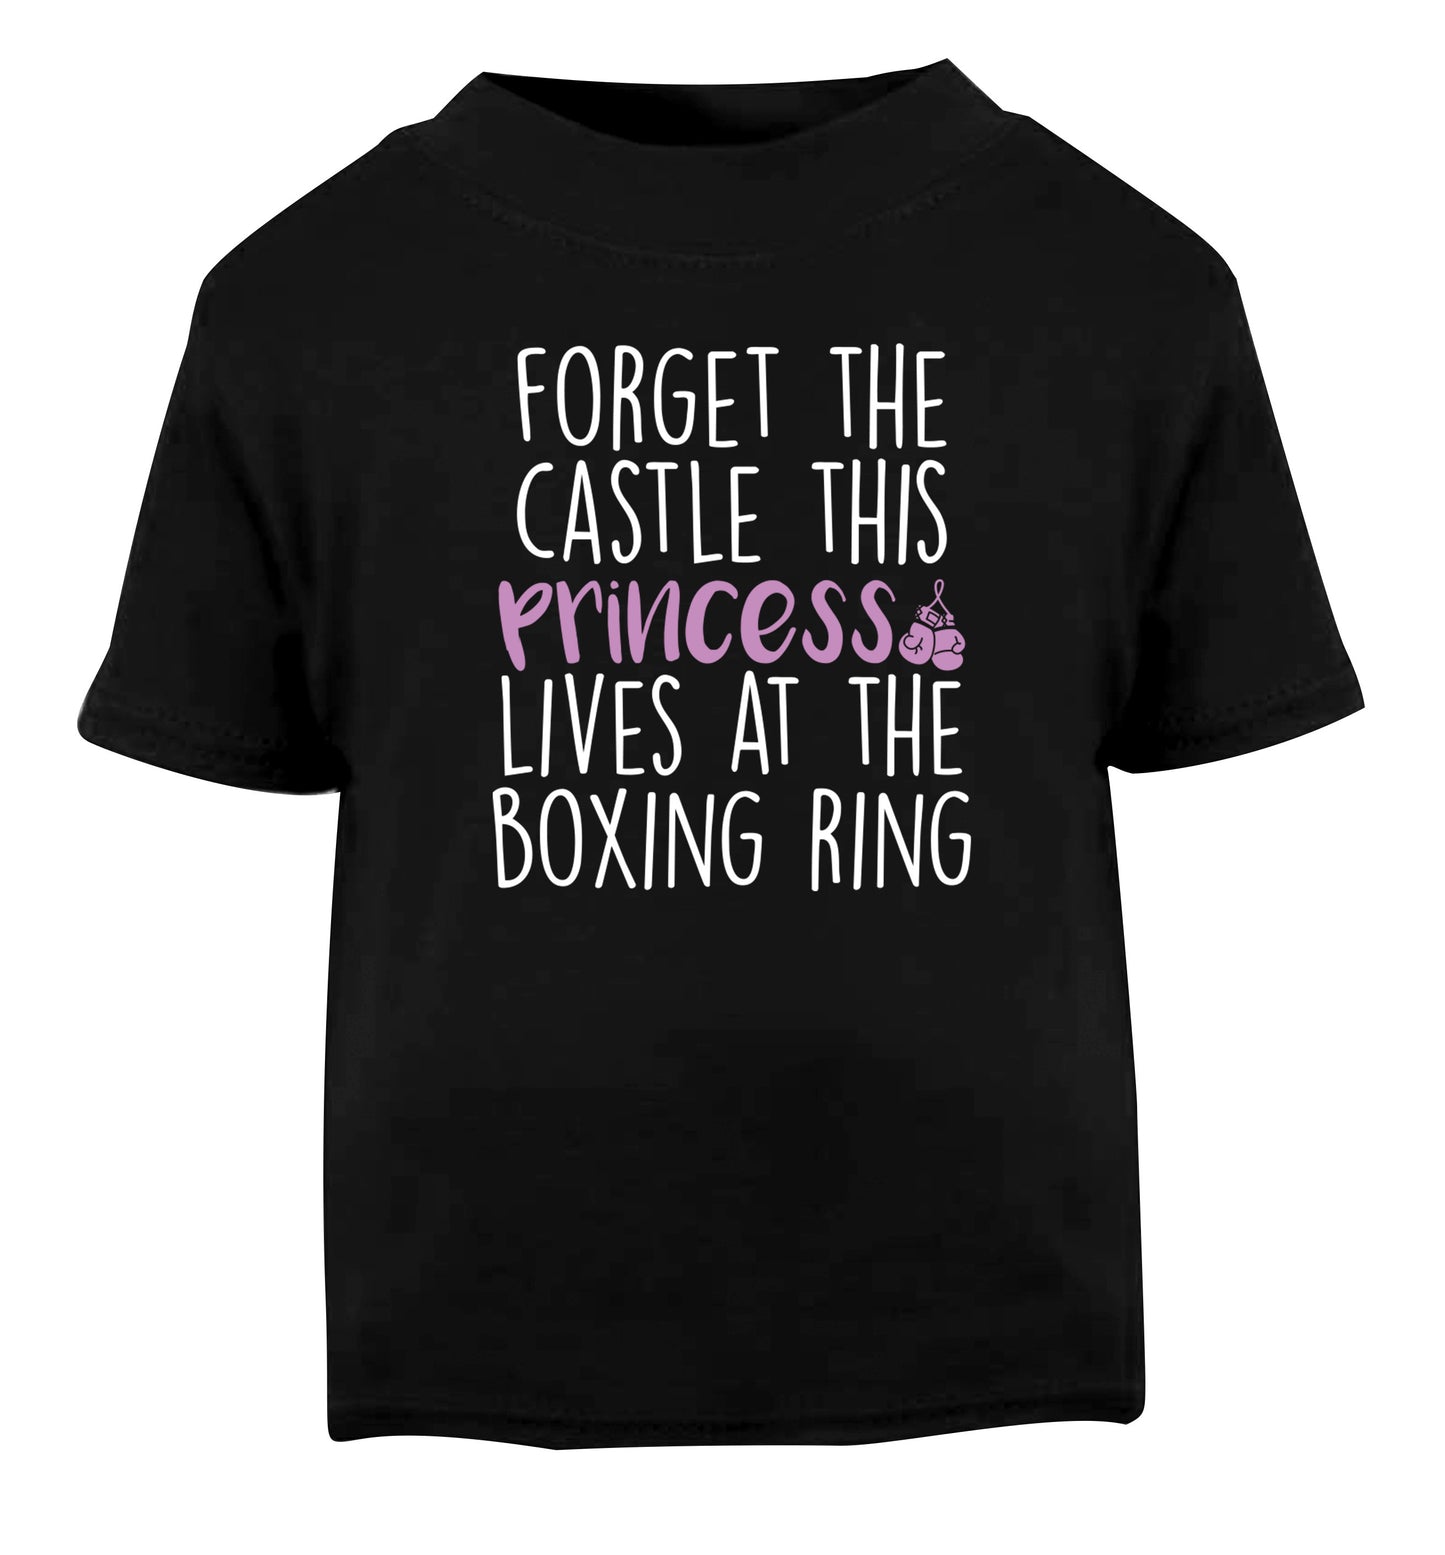 Forget the castle this princess lives at the boxing ring Black Baby Toddler Tshirt 2 years